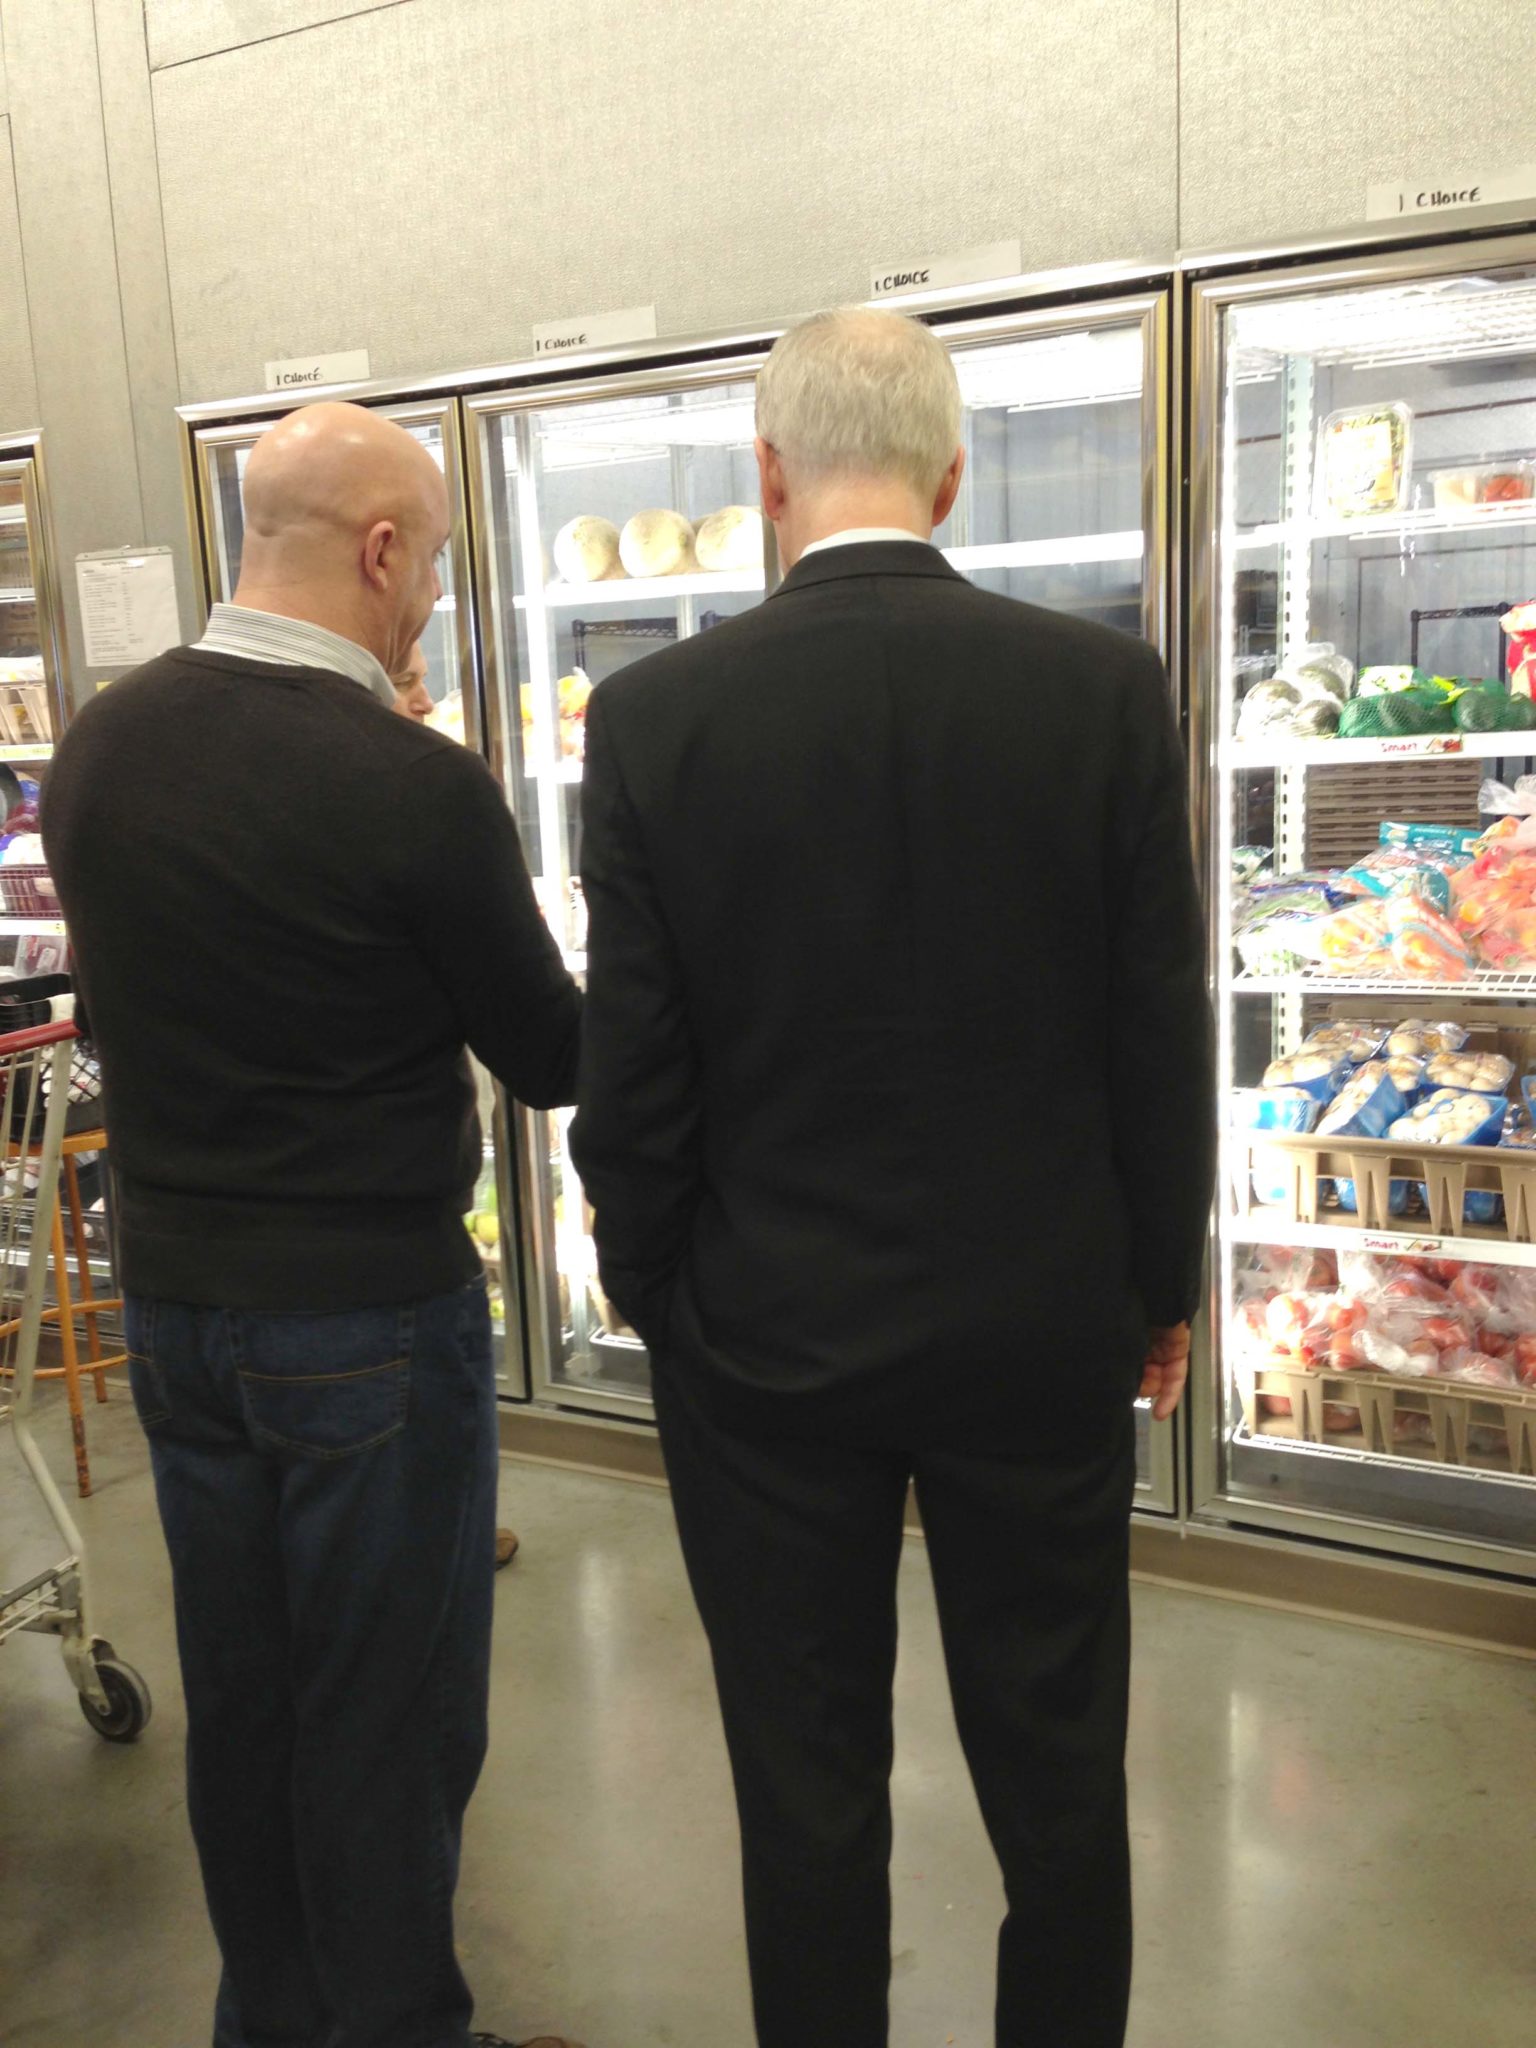 (l-r) Executive Director/CEO Charles McLimans and Congressman Bill Foster view refrigerated section